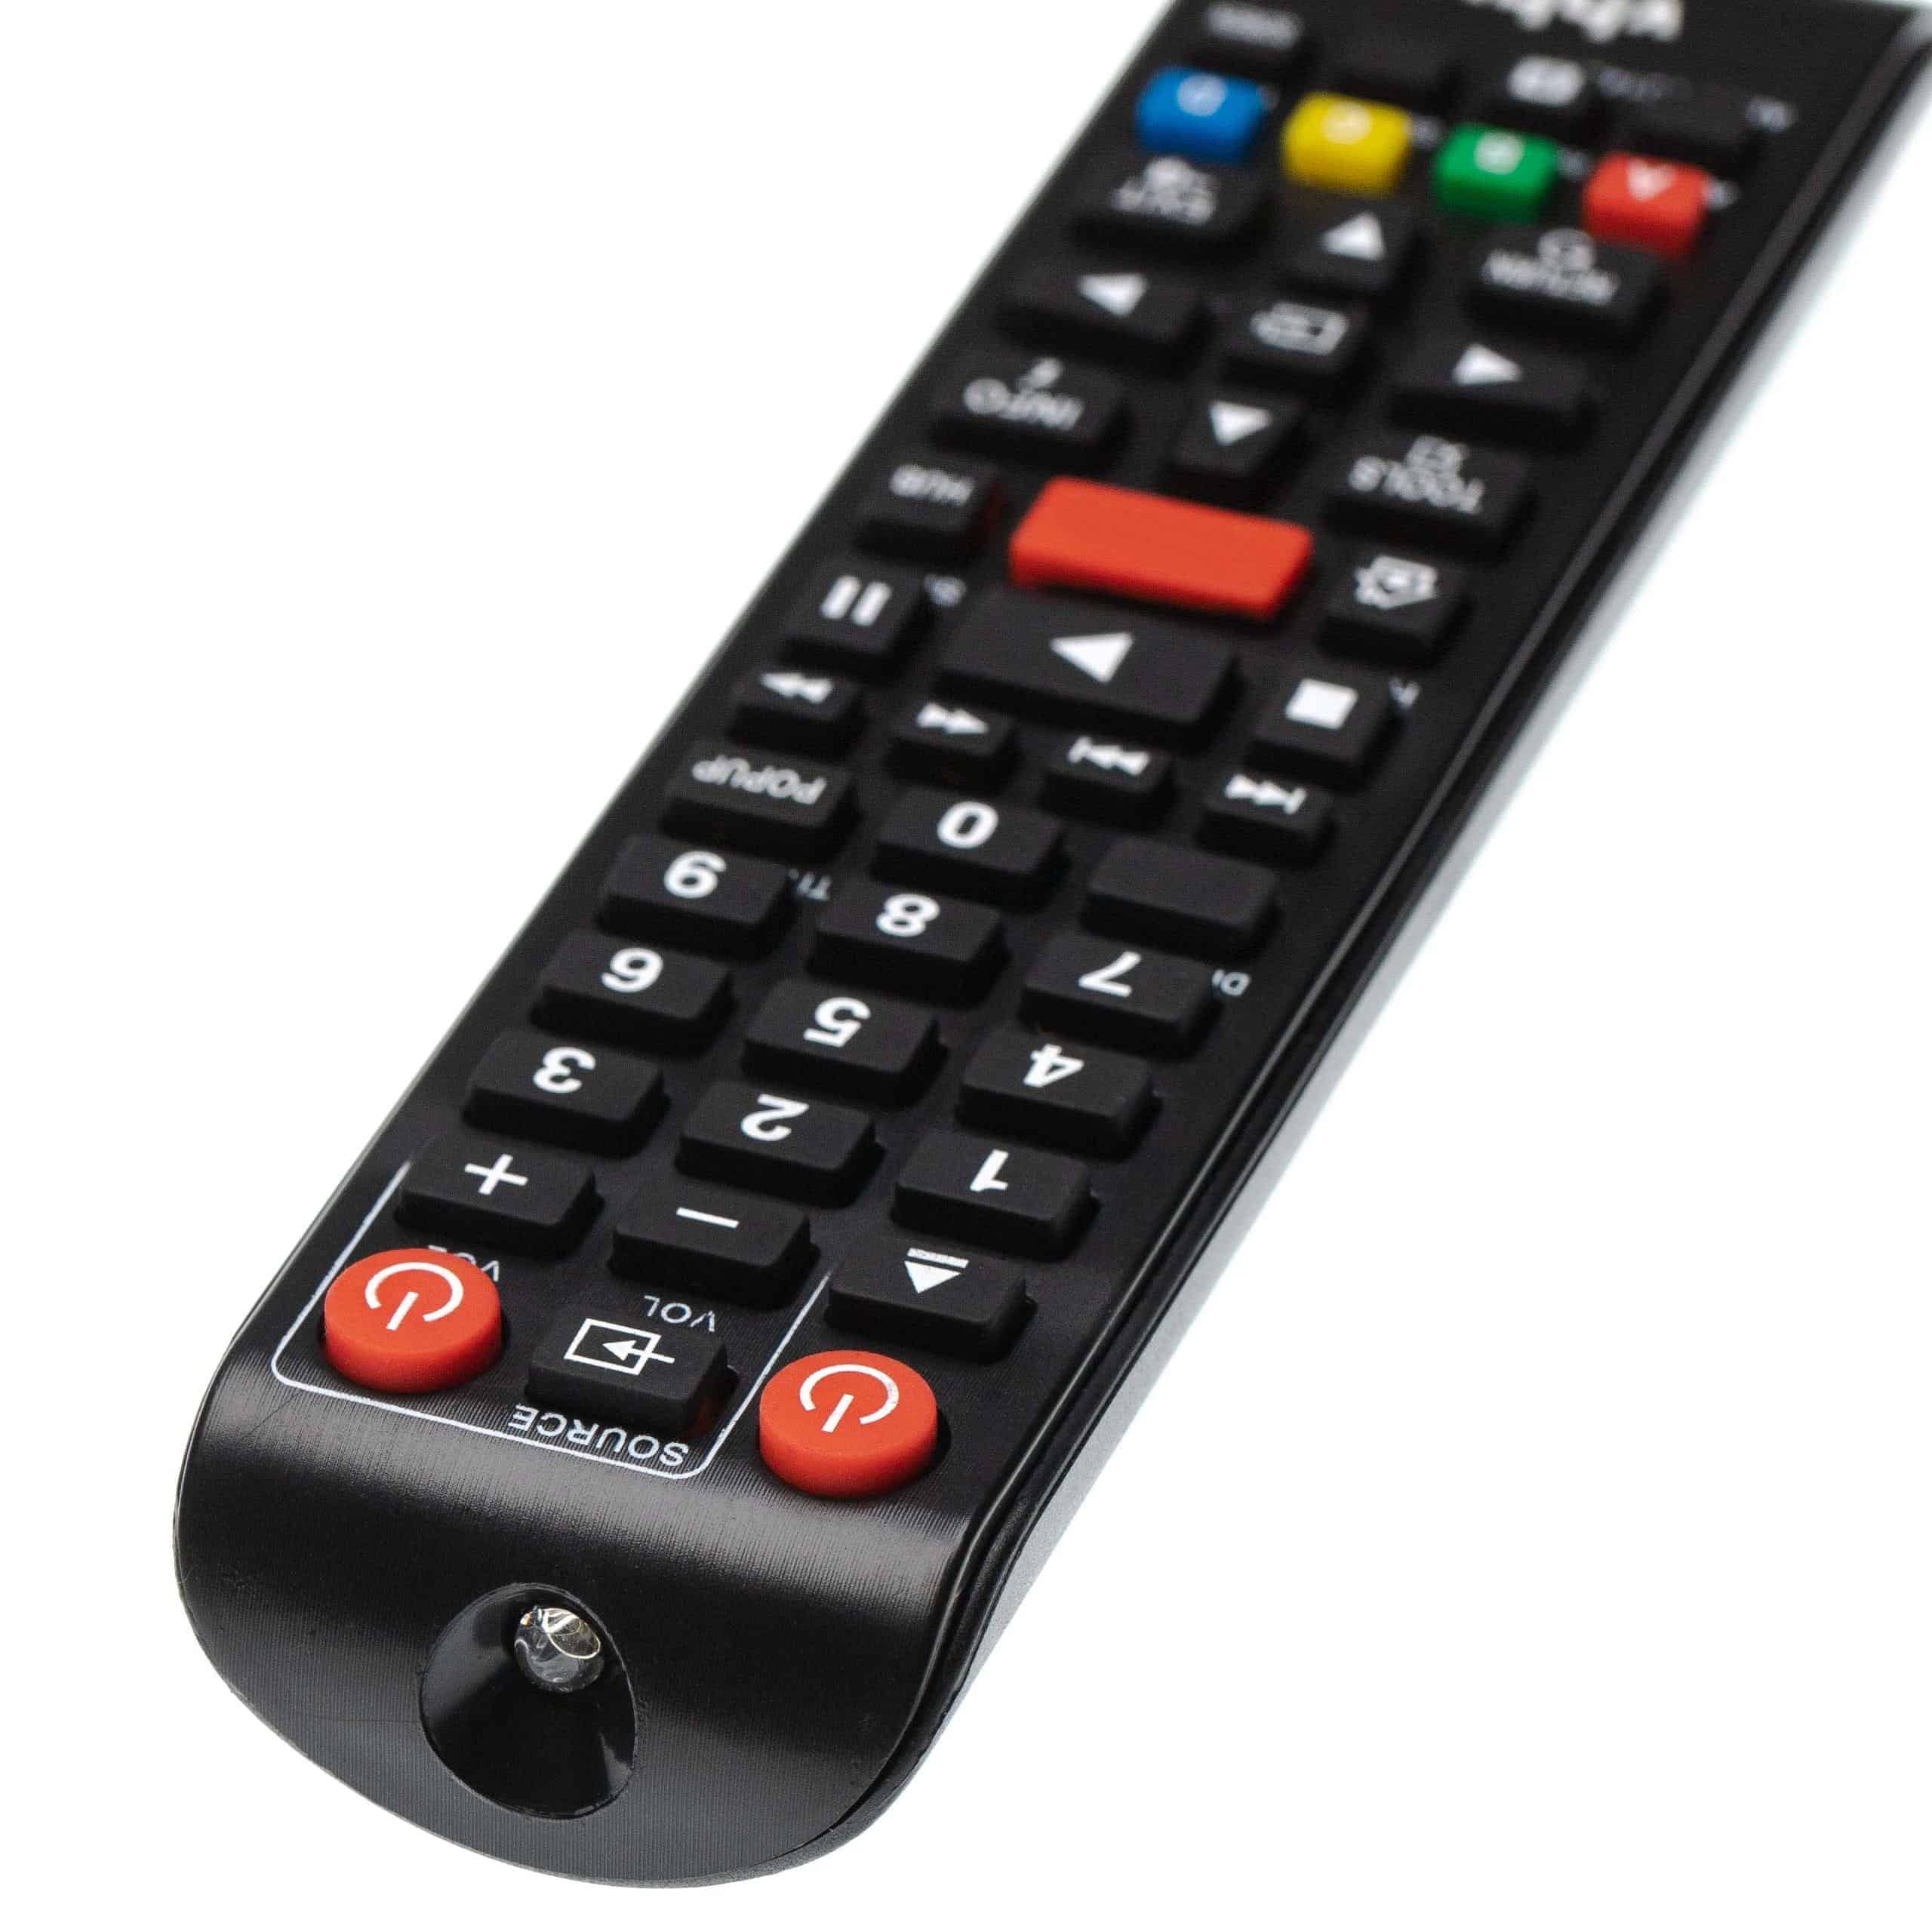 Remote Control replaces Samsung AK59-00145A for Samsung Blu-Ray Disc Player